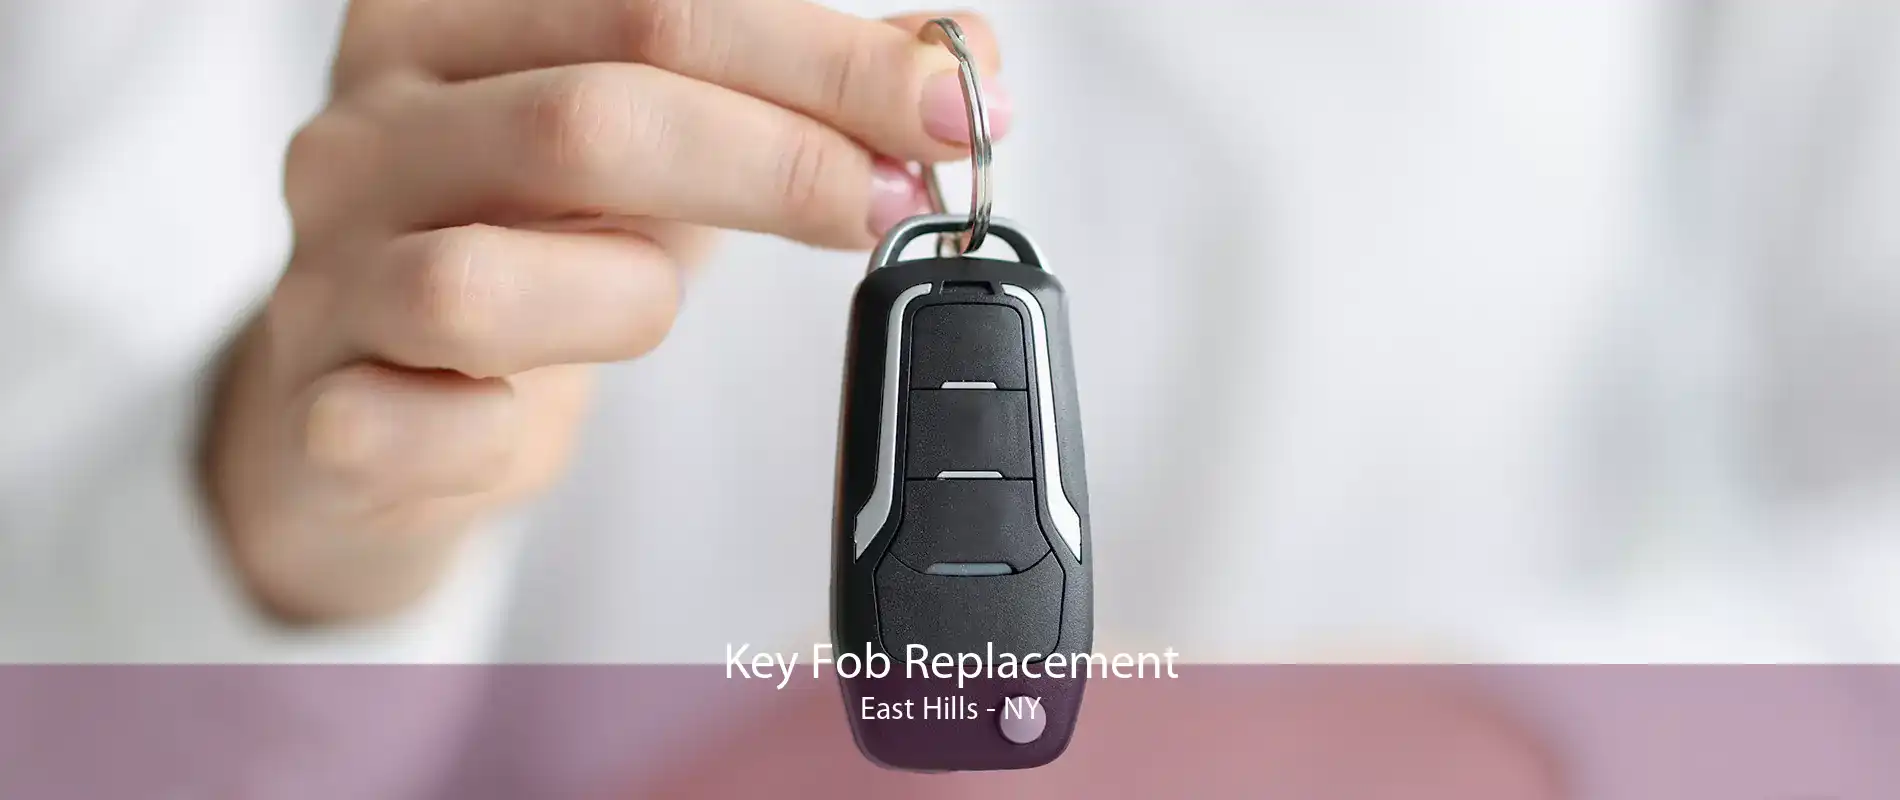 Key Fob Replacement East Hills - NY